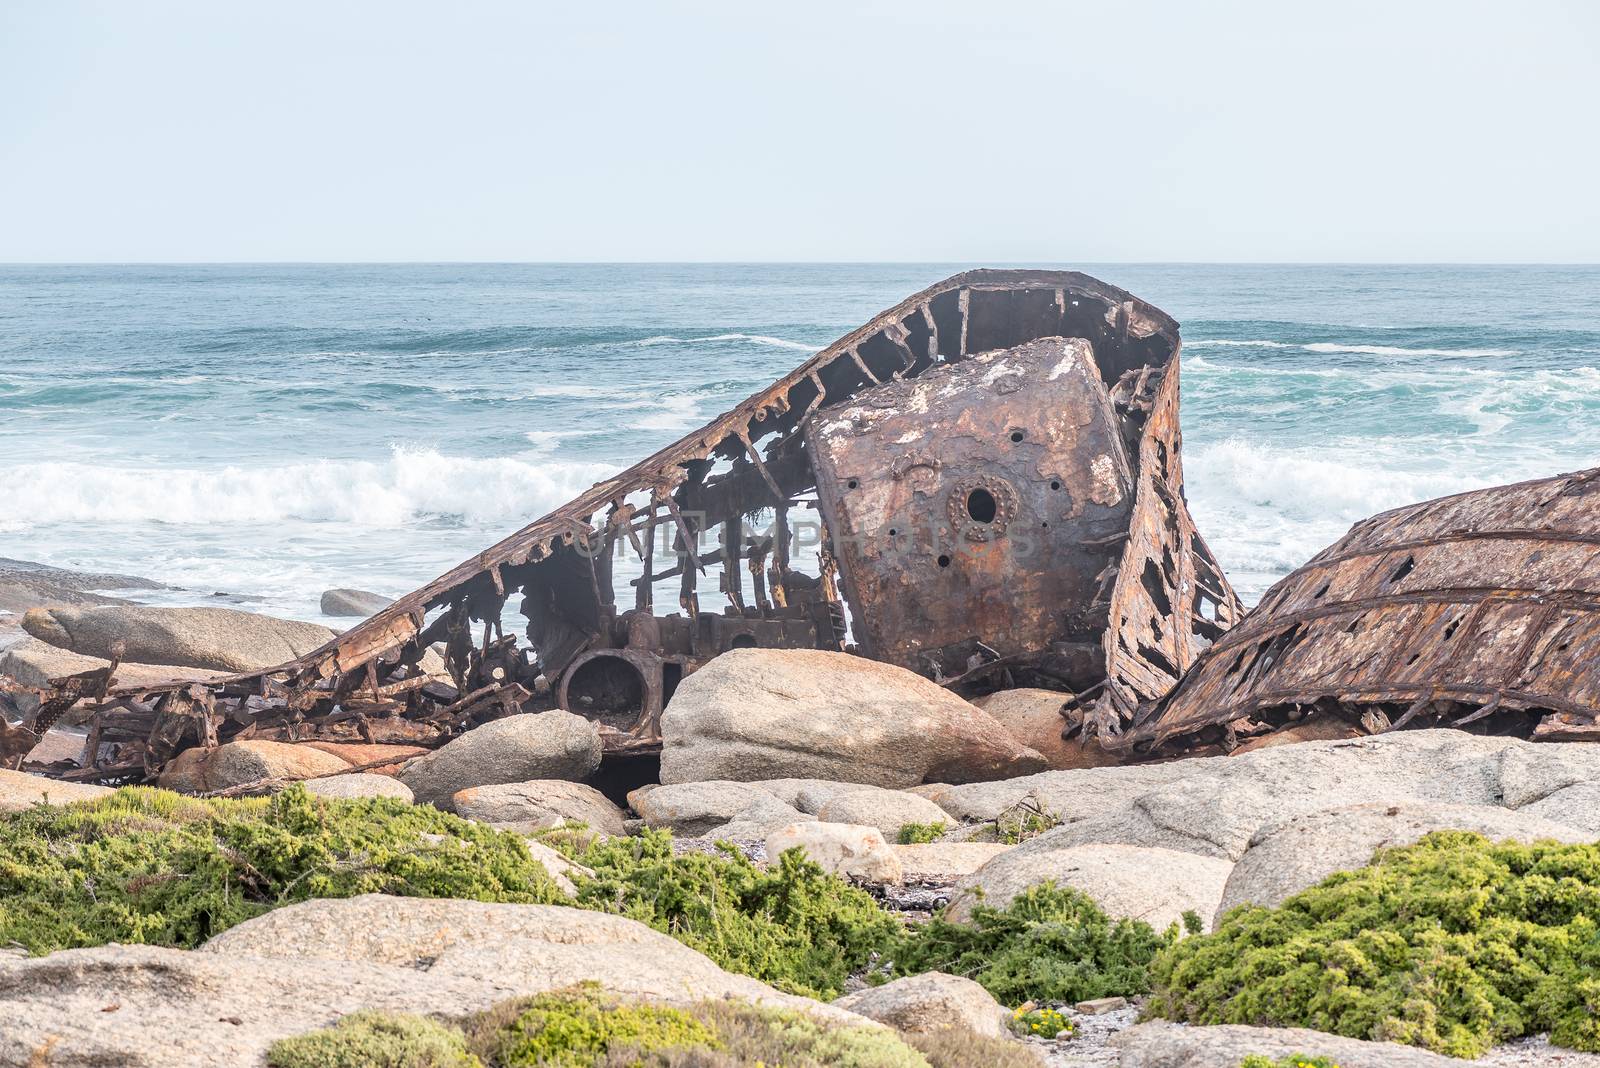 The wreck of the Aristea, a fishing trawler that ran aground on 4th July 1945 at Hondklipbaai on the South African Atlantic coast. The ship also served as mine sweeper in World War 2